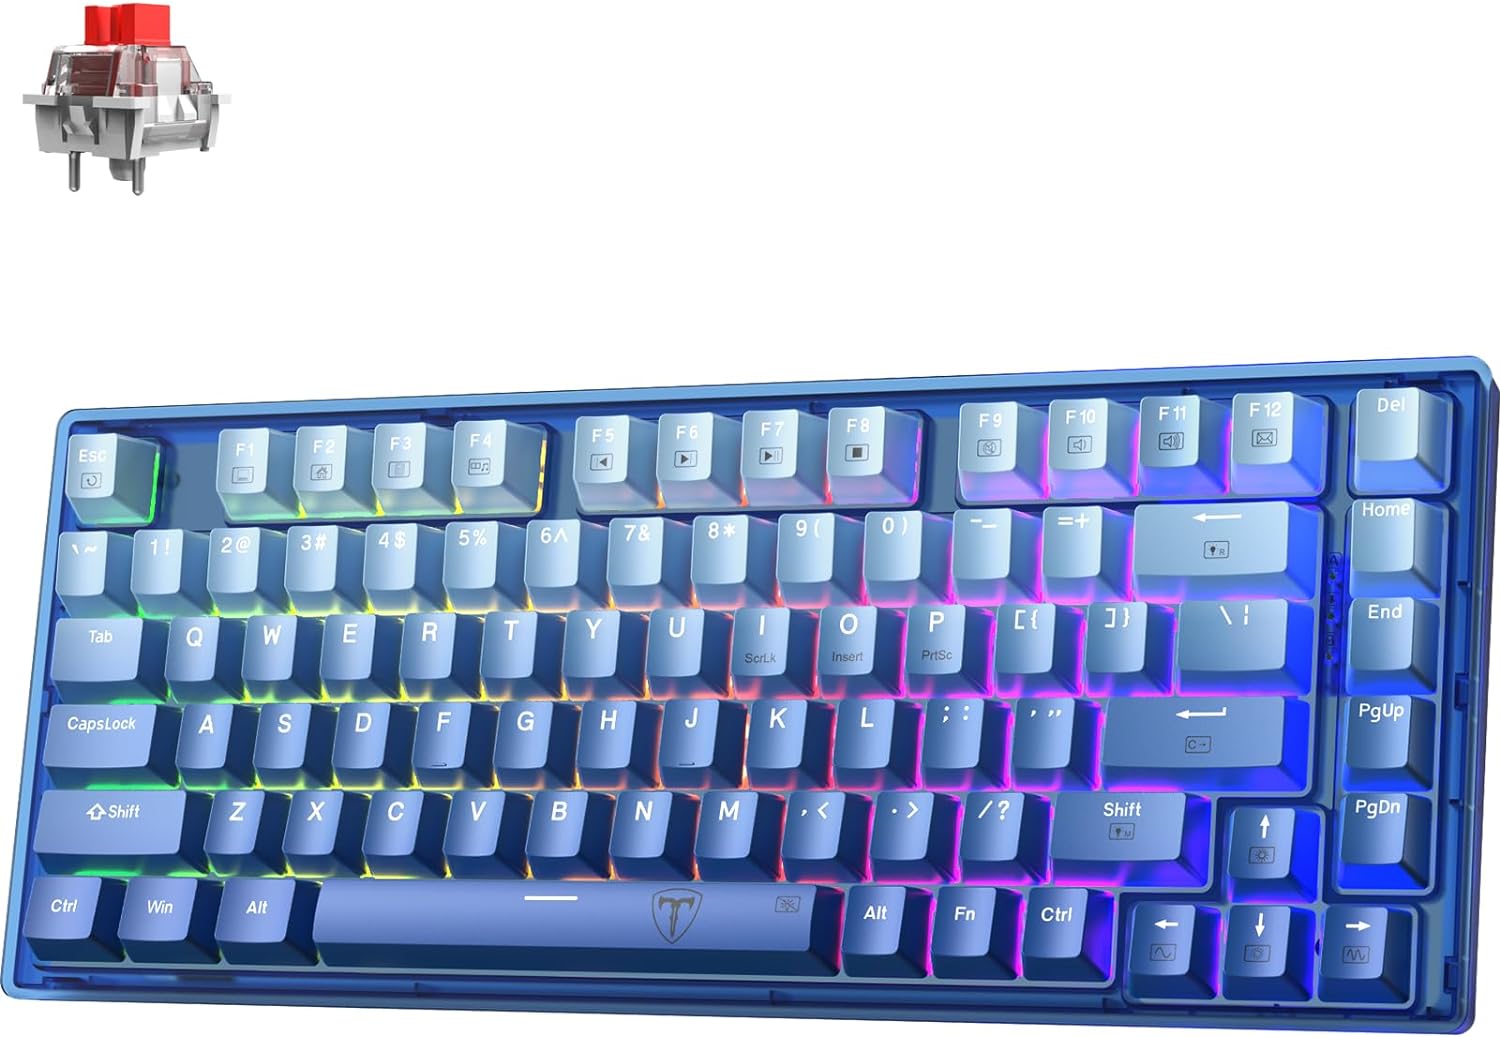 RisoPhy 60 Percent Keyboard, 82 Keys Hot Swappable Mechanical Gaming Keyboard, Linear Silent Red Switches, Blue PBT Keycaps, Compact Mini RGB Backlit Wired Creamy Keyboard, Pro Driver Supported